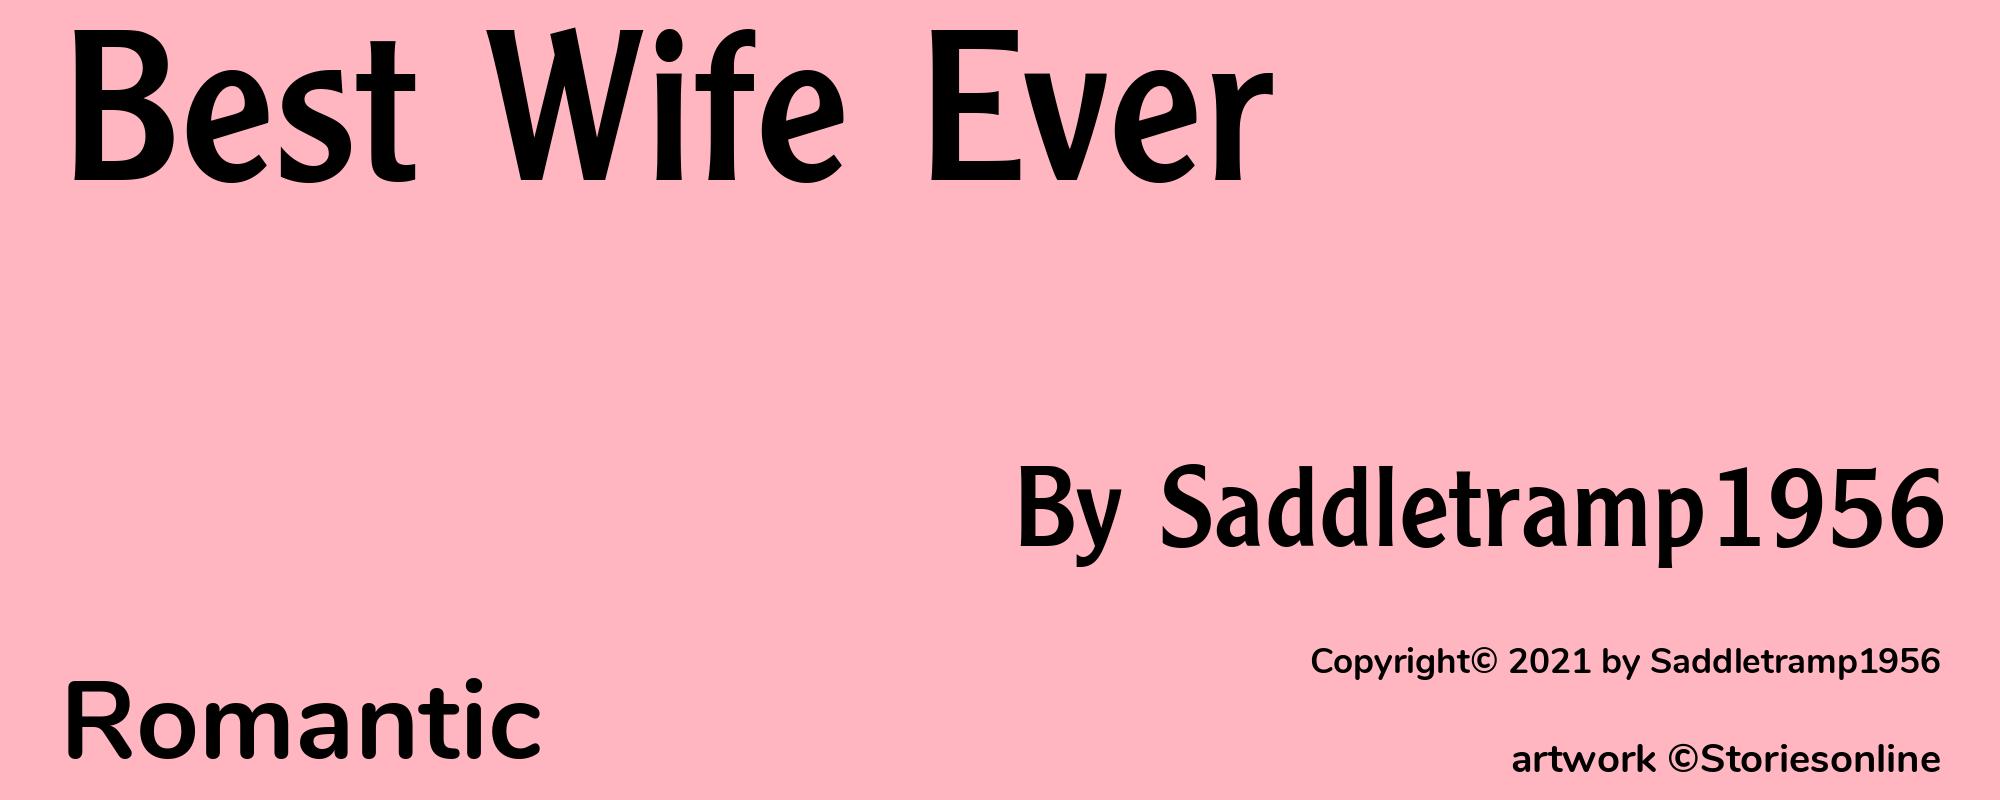 Best Wife Ever - Cover